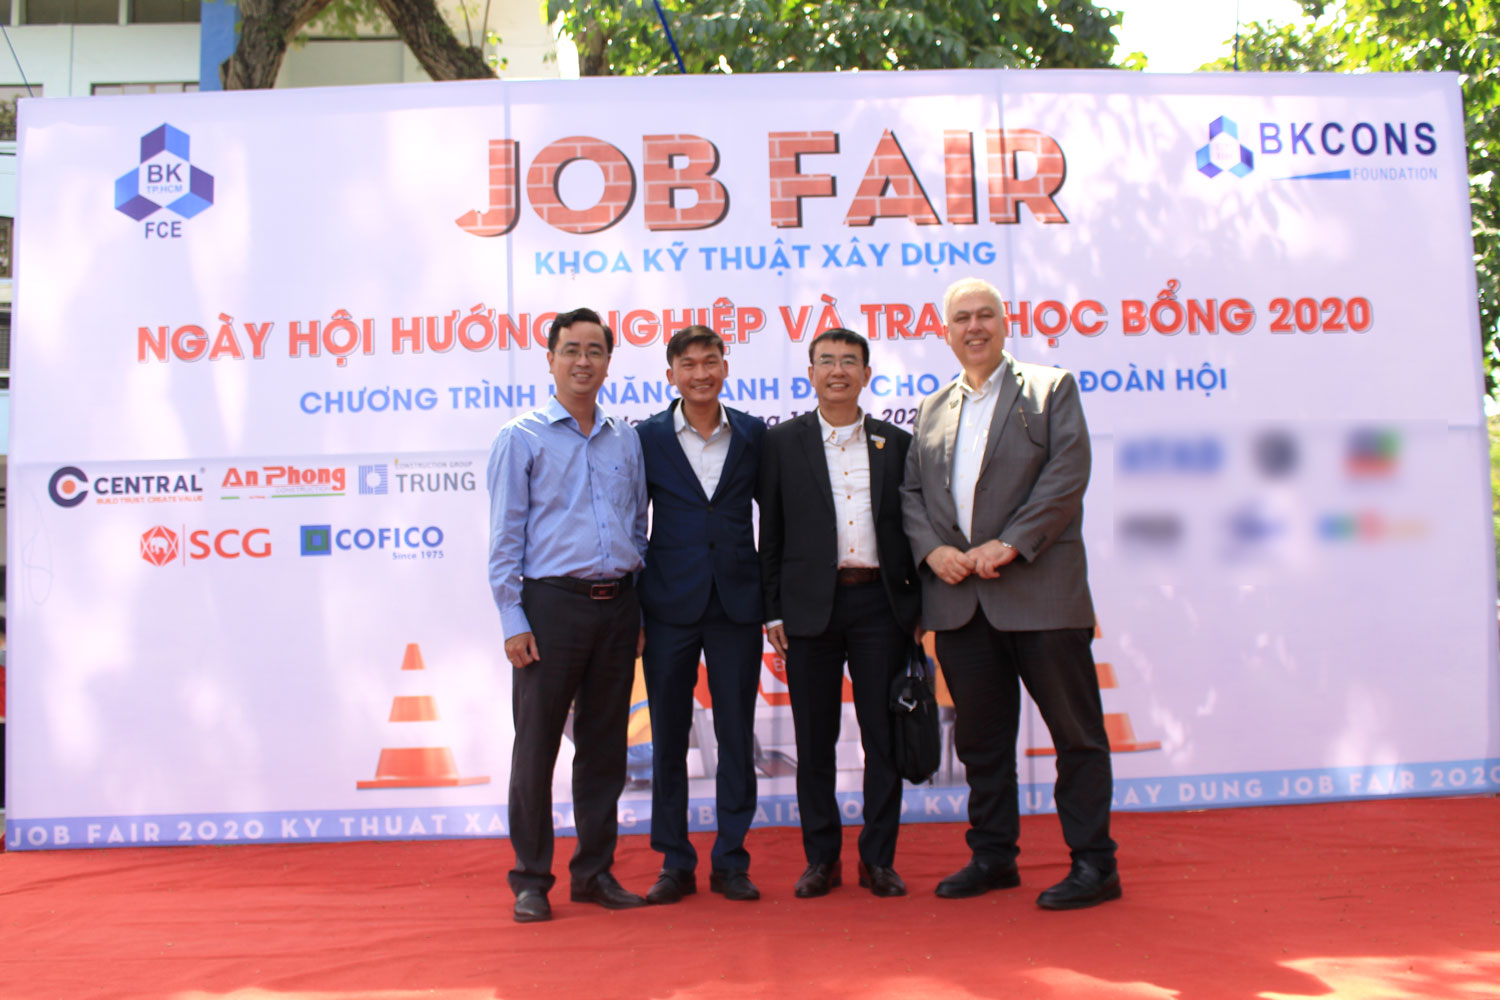 Job Fair 2020 is an opportunity to strengthen the relationship with HCMUT and other businesses.